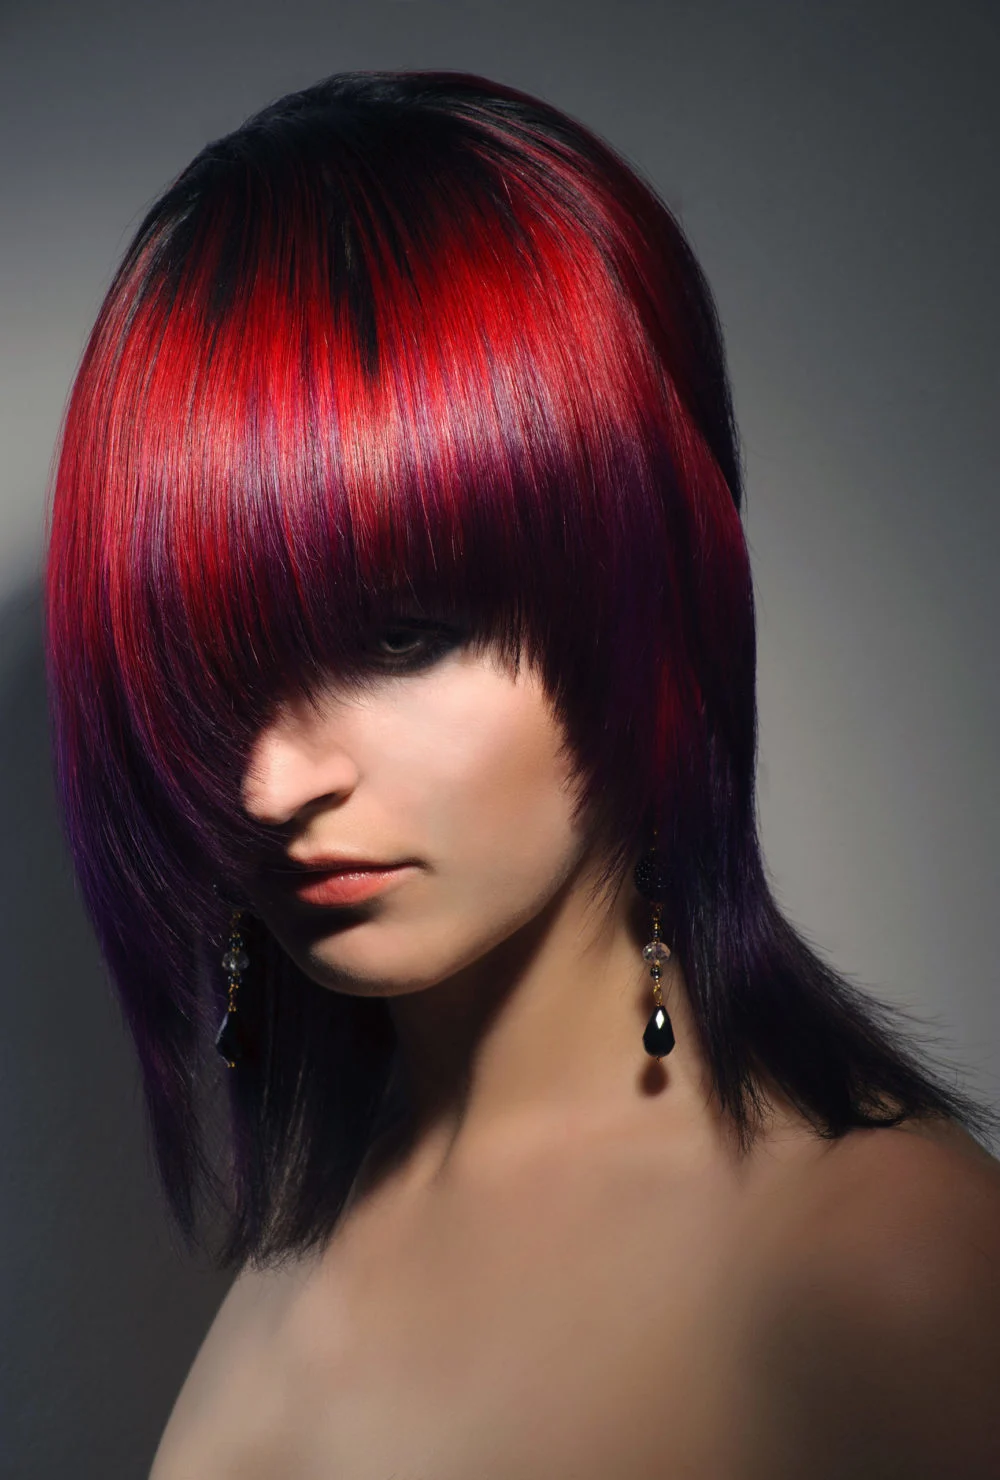 Siren Red With Peekaboo True Violet Purple and Red Hair Color on a woman with bangs covering her eyes